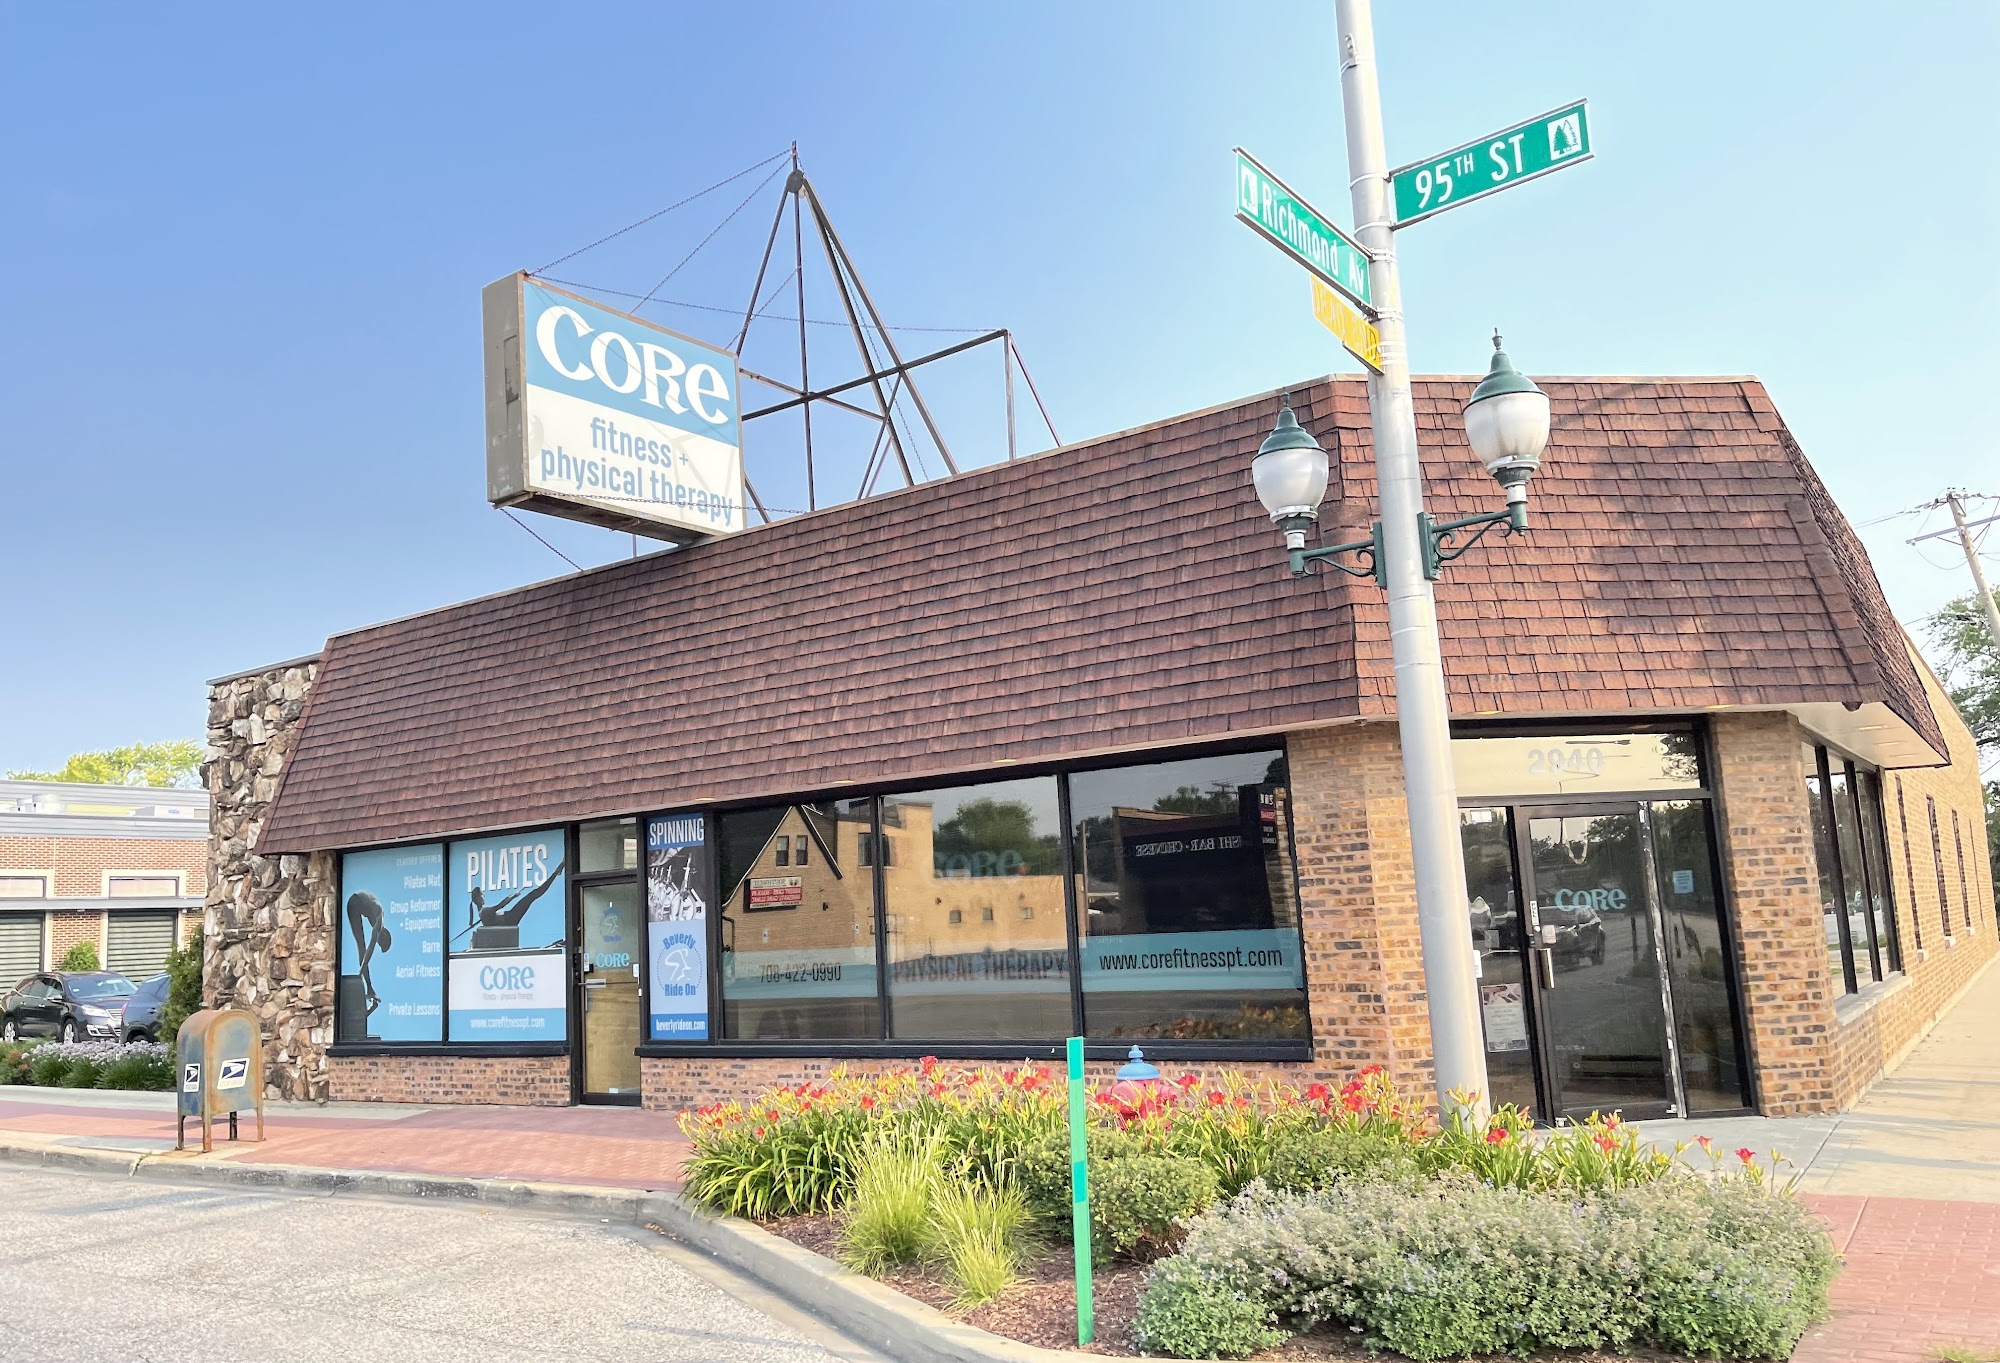 Core Fitness & Physical Therapy